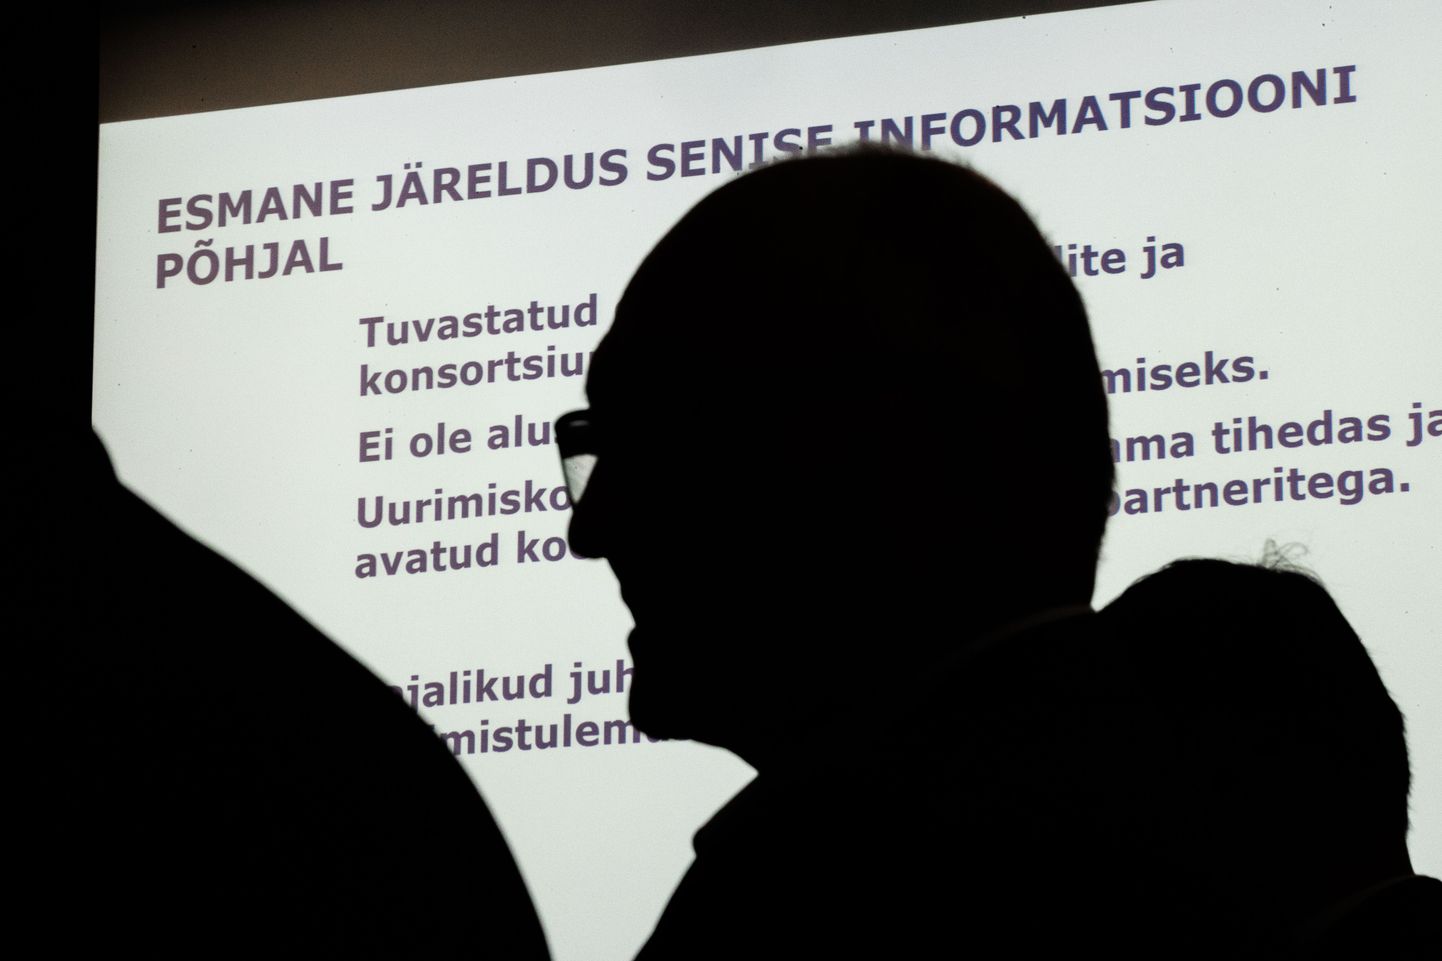 The investigative committee of the Tallinn University of Technology (TalTech) presented an interim report yesterday.